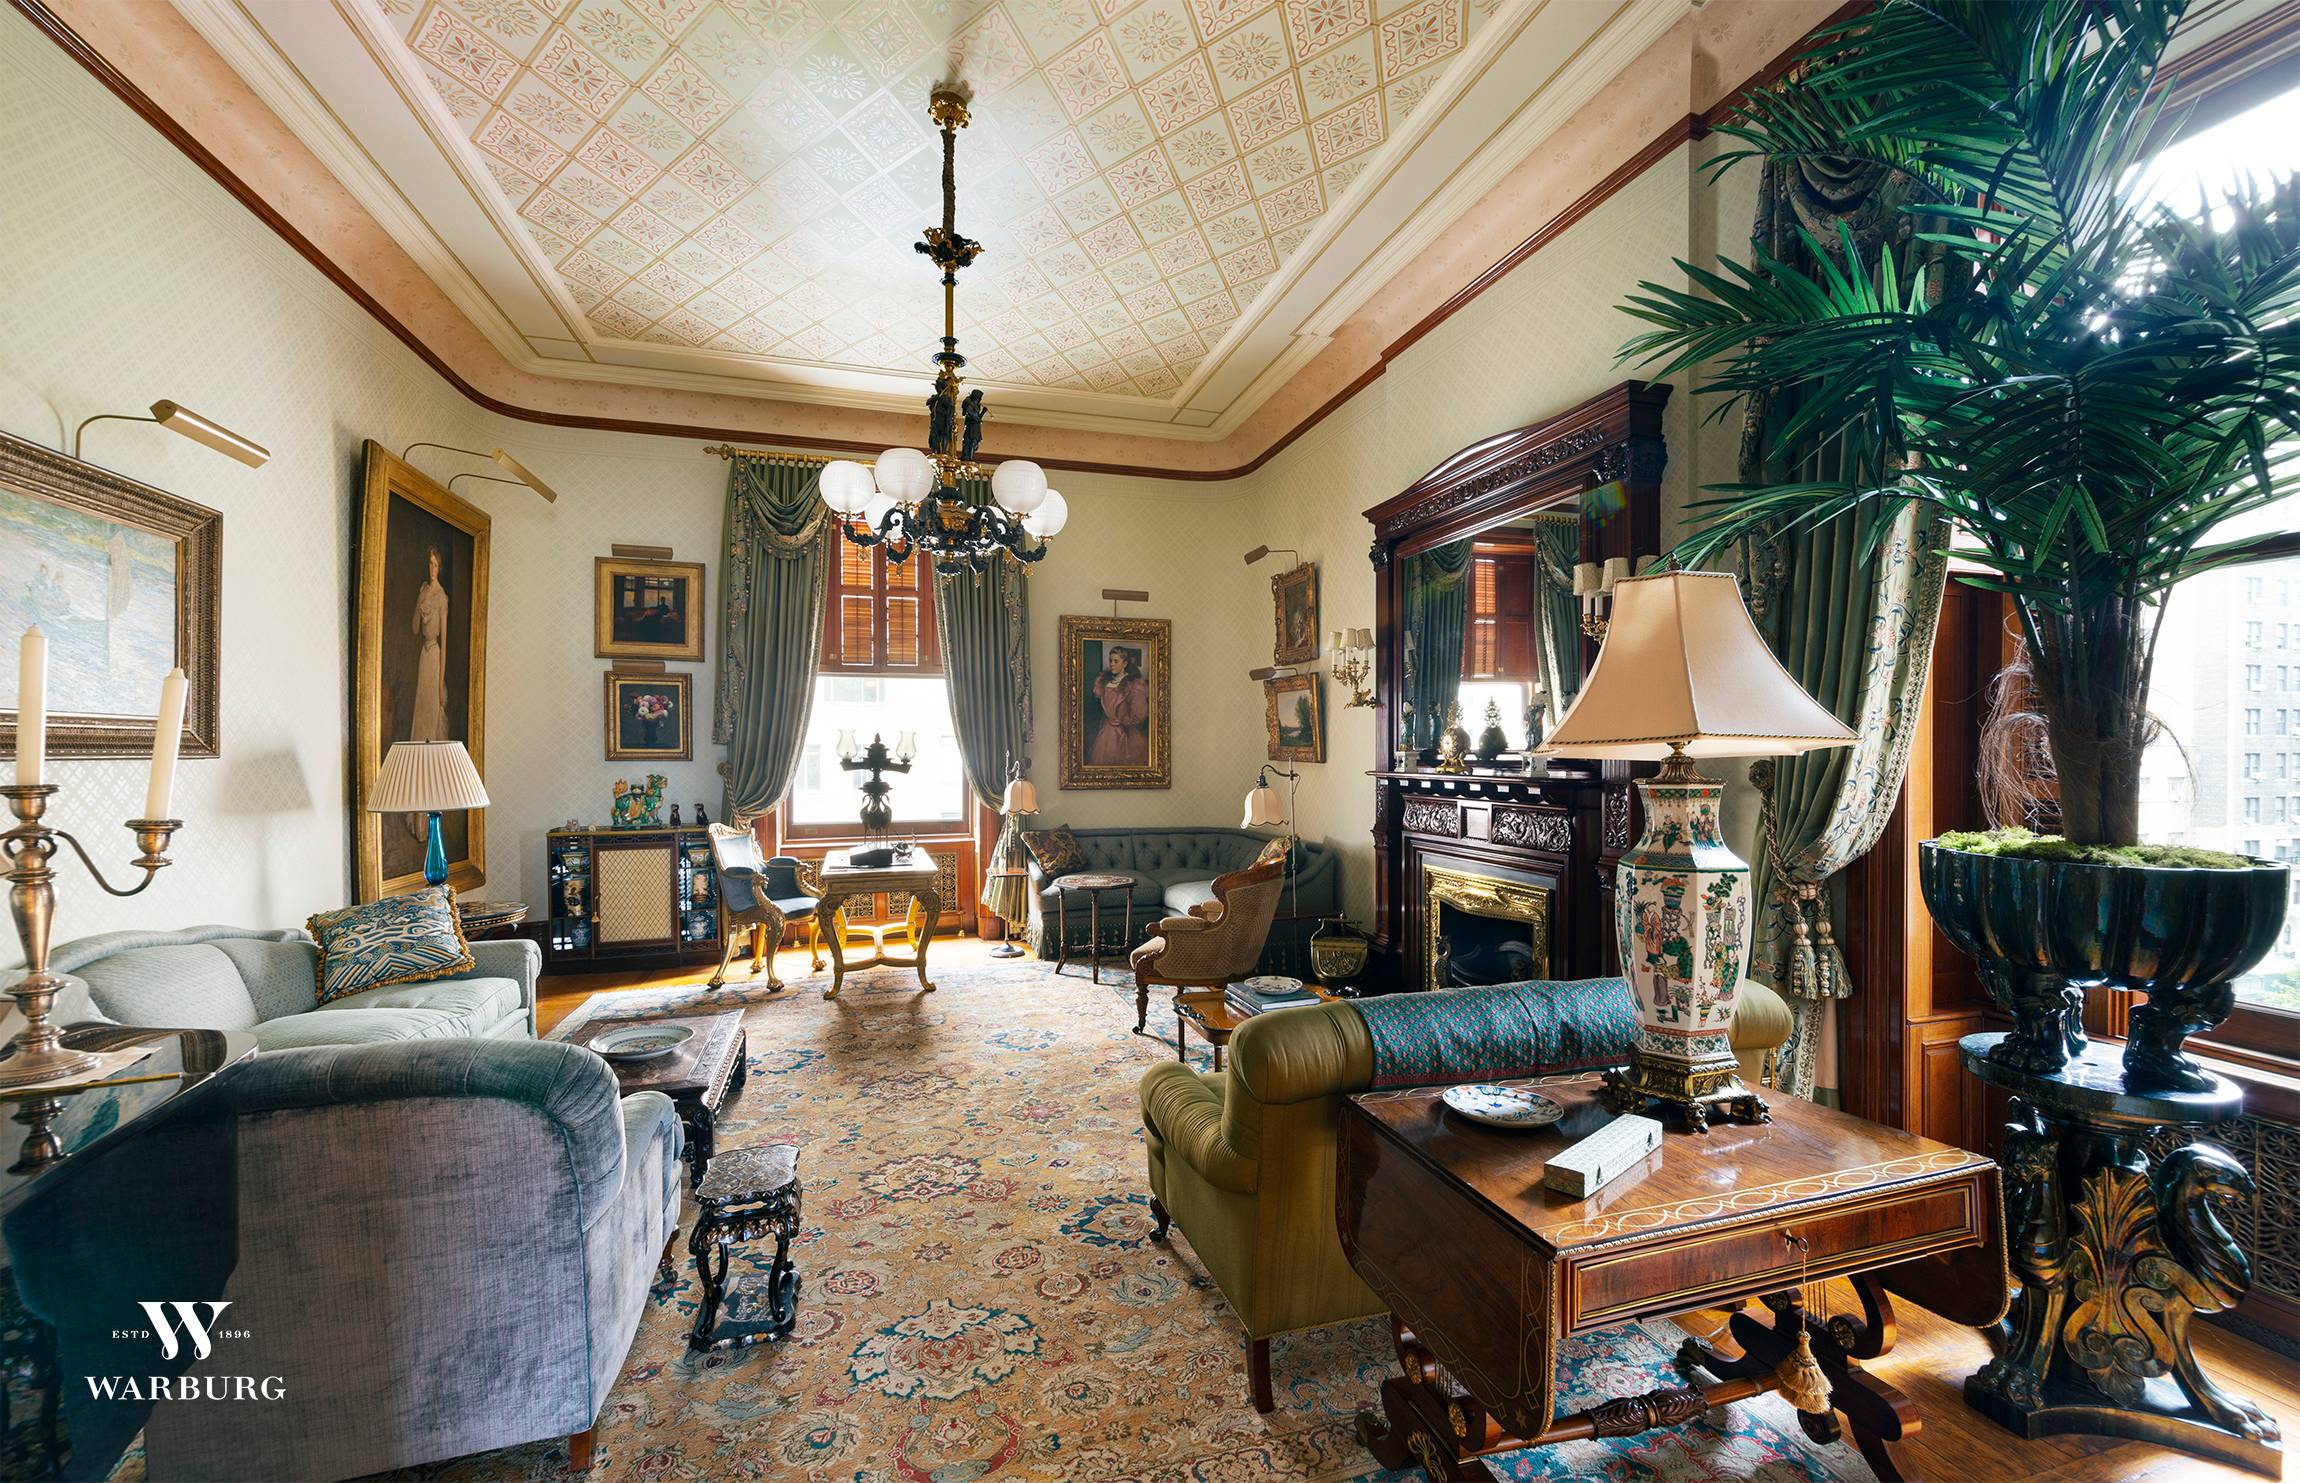 Meticulously restored three bedroom apartment at The Dakota beaming with historic character and detail, five wood burning fireplaces, soaring 14' ceilings, and countless modern day appointments catering to today's lifestyles.